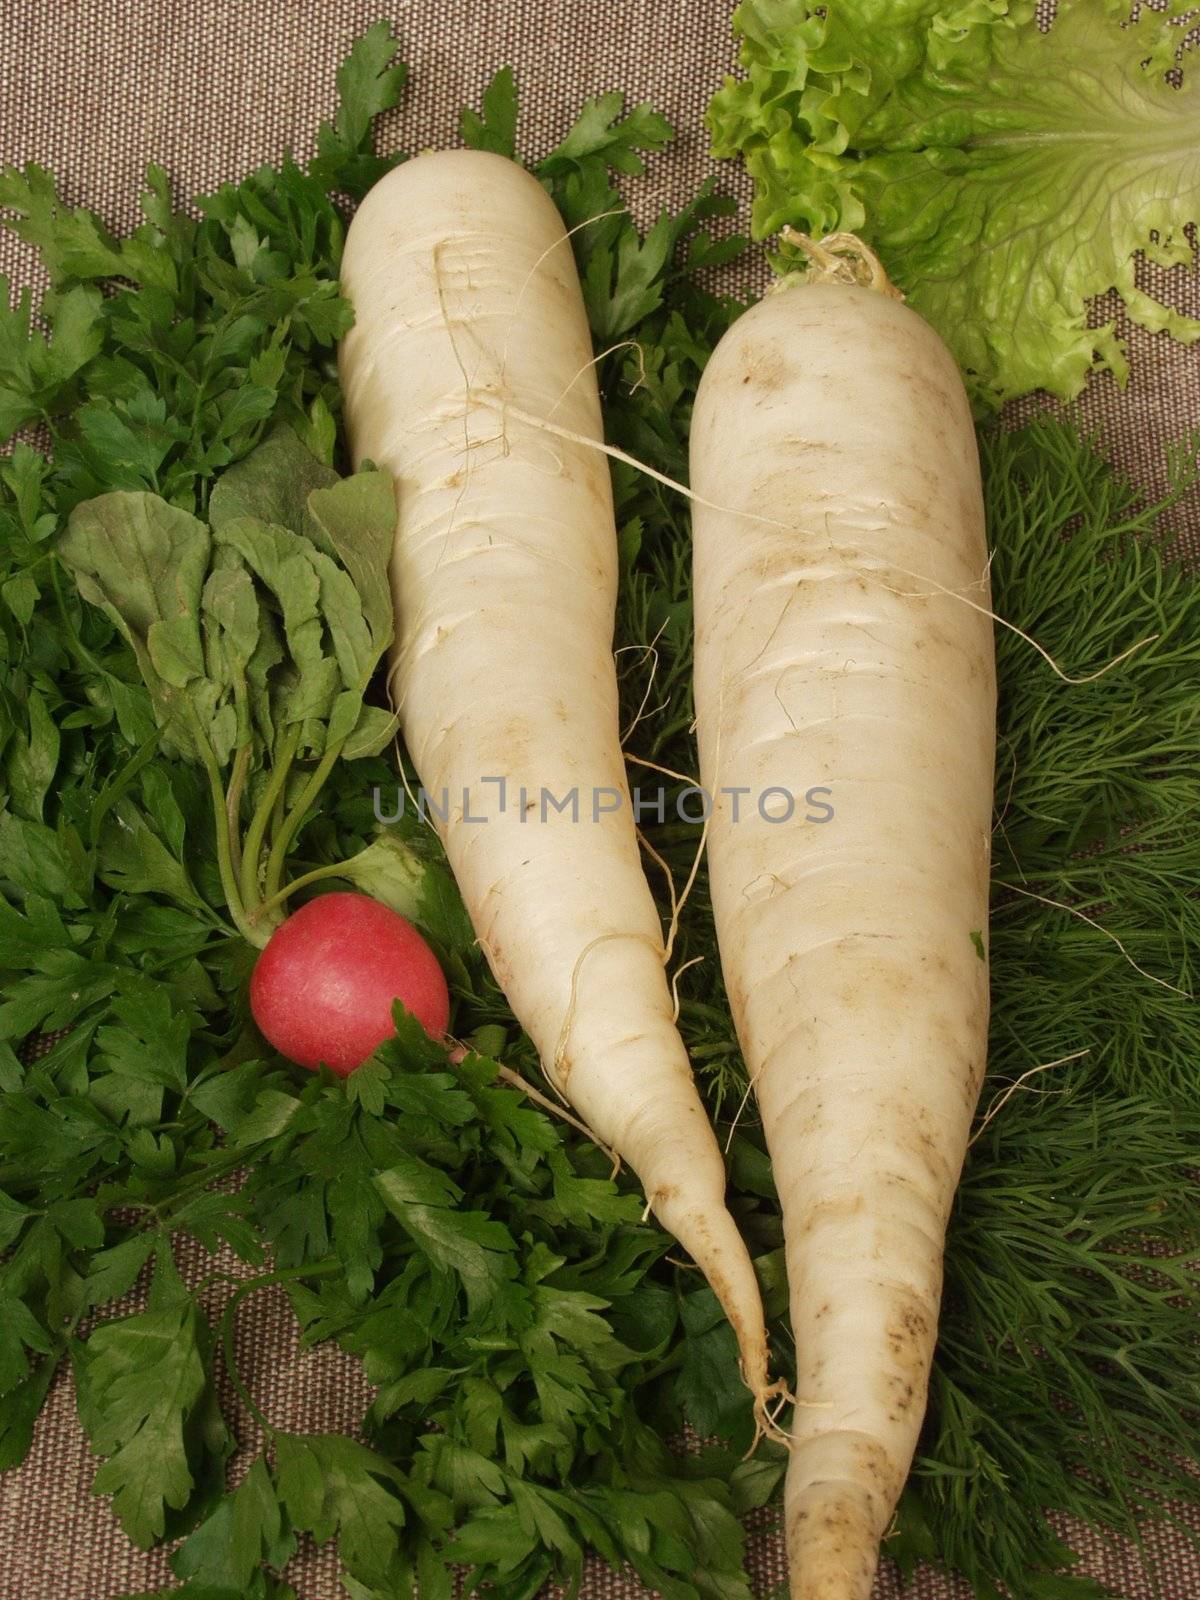 White radish with a parsley and fennel on a sacking    